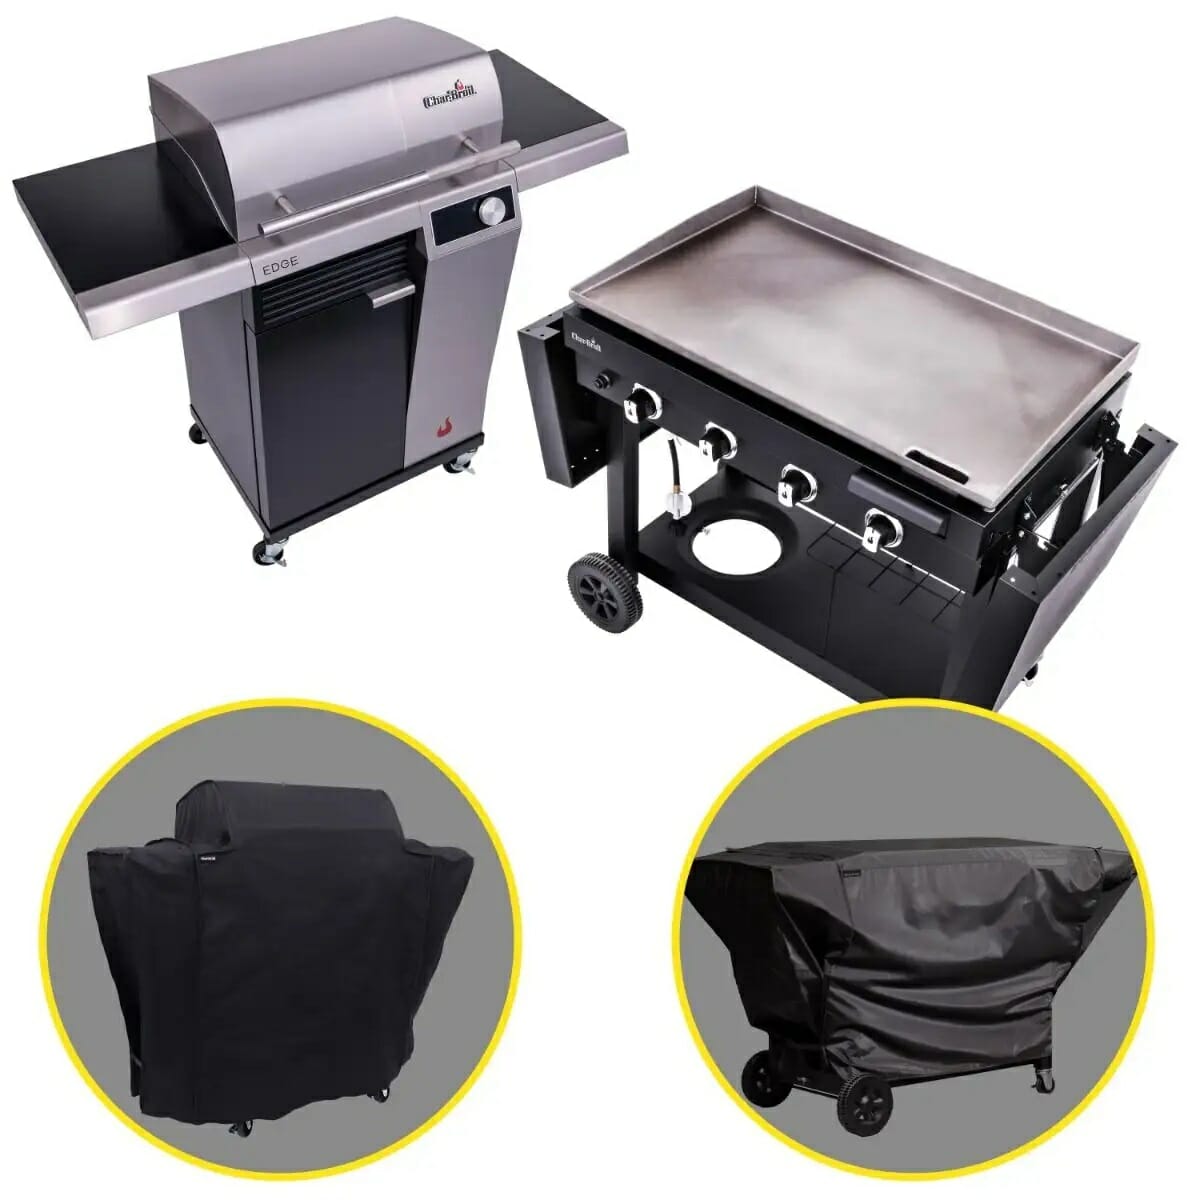 https://www.cookoutnews.com/wp-content/uploads/2023/04/Char-Broil-EDGE-and-Flat-Top-Grill-Bundle.jpg